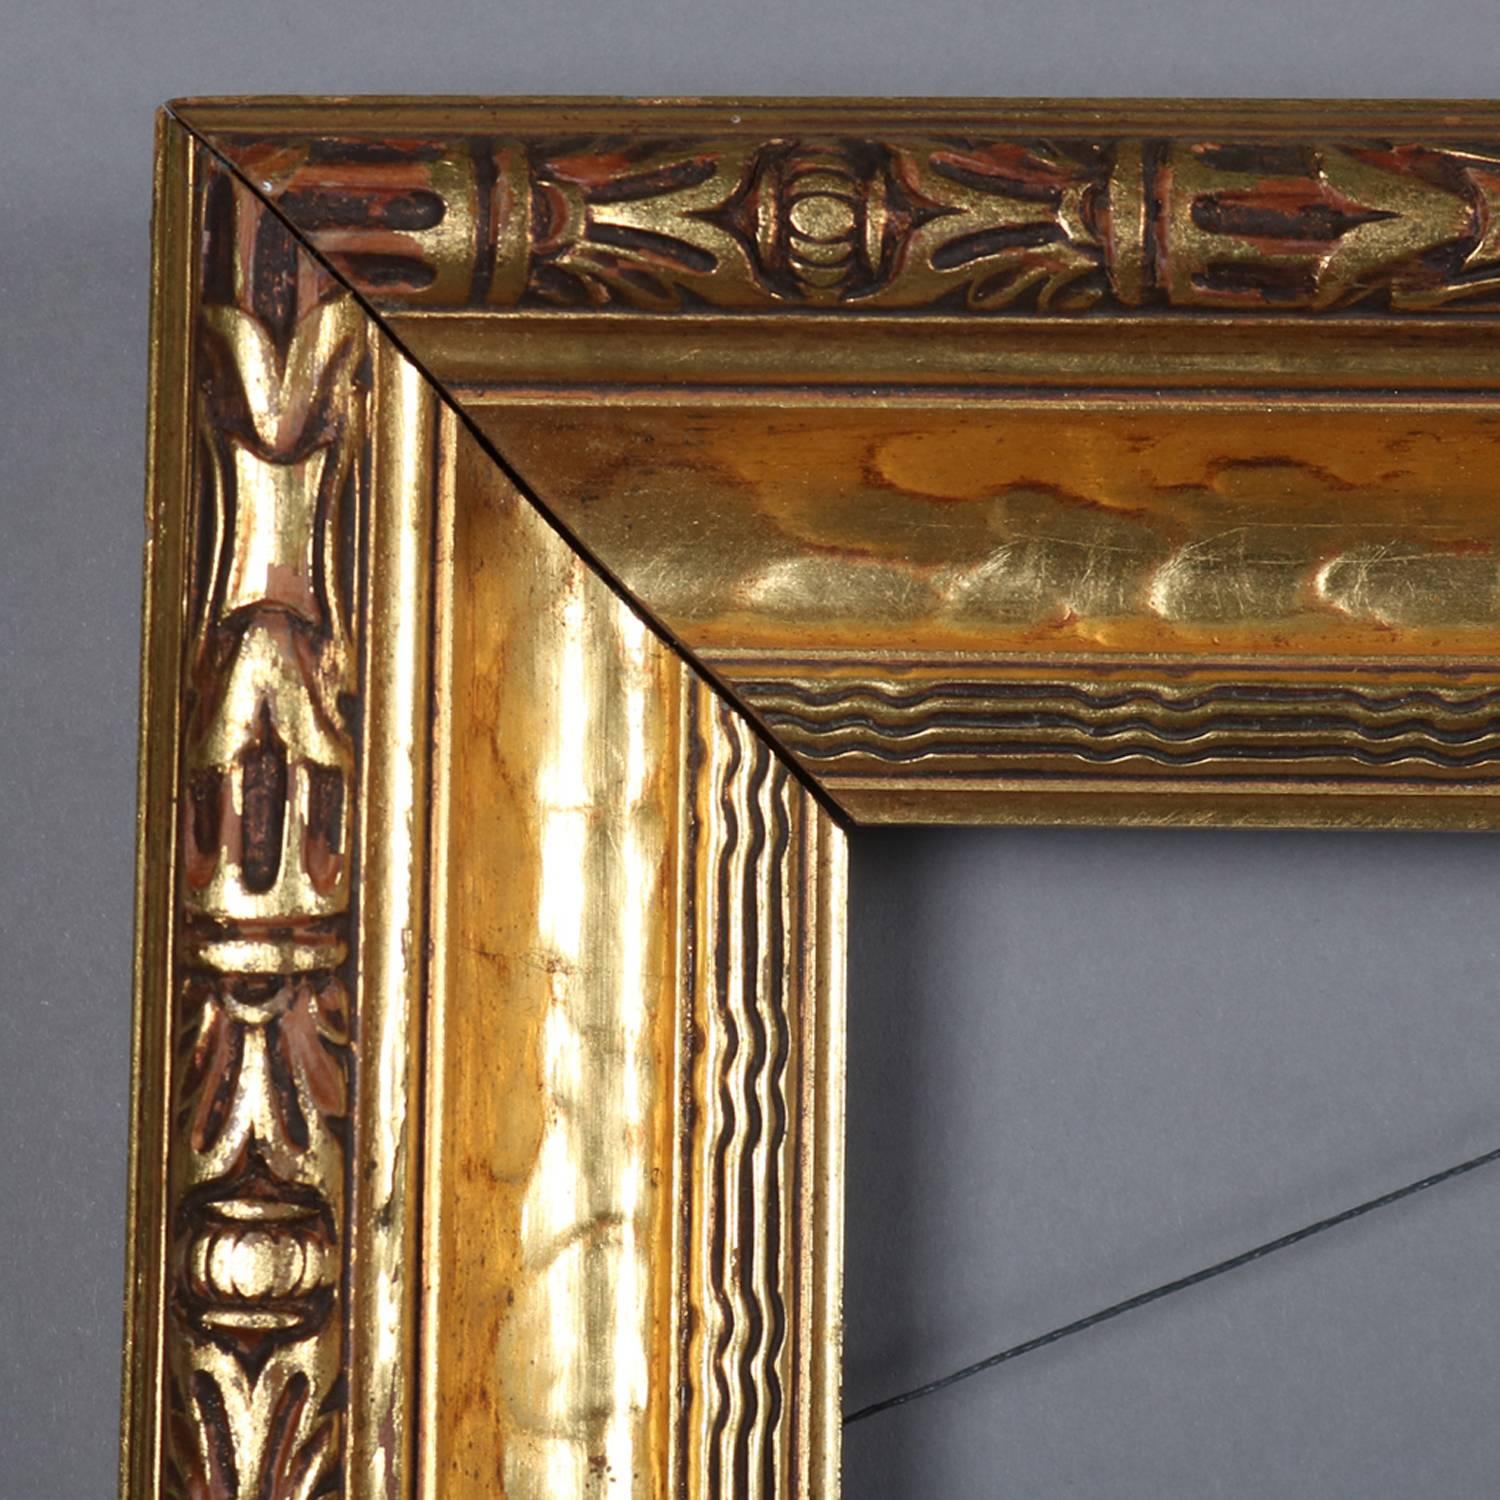 Arts & crafts style carved gold gilt wood art or mirror frame features modeled finish with carved foliate outer border and lined inner border; for artwork, picture, painting or mirror; 20th century

***DELIVERY NOTICE – Due to COVID-19 we are